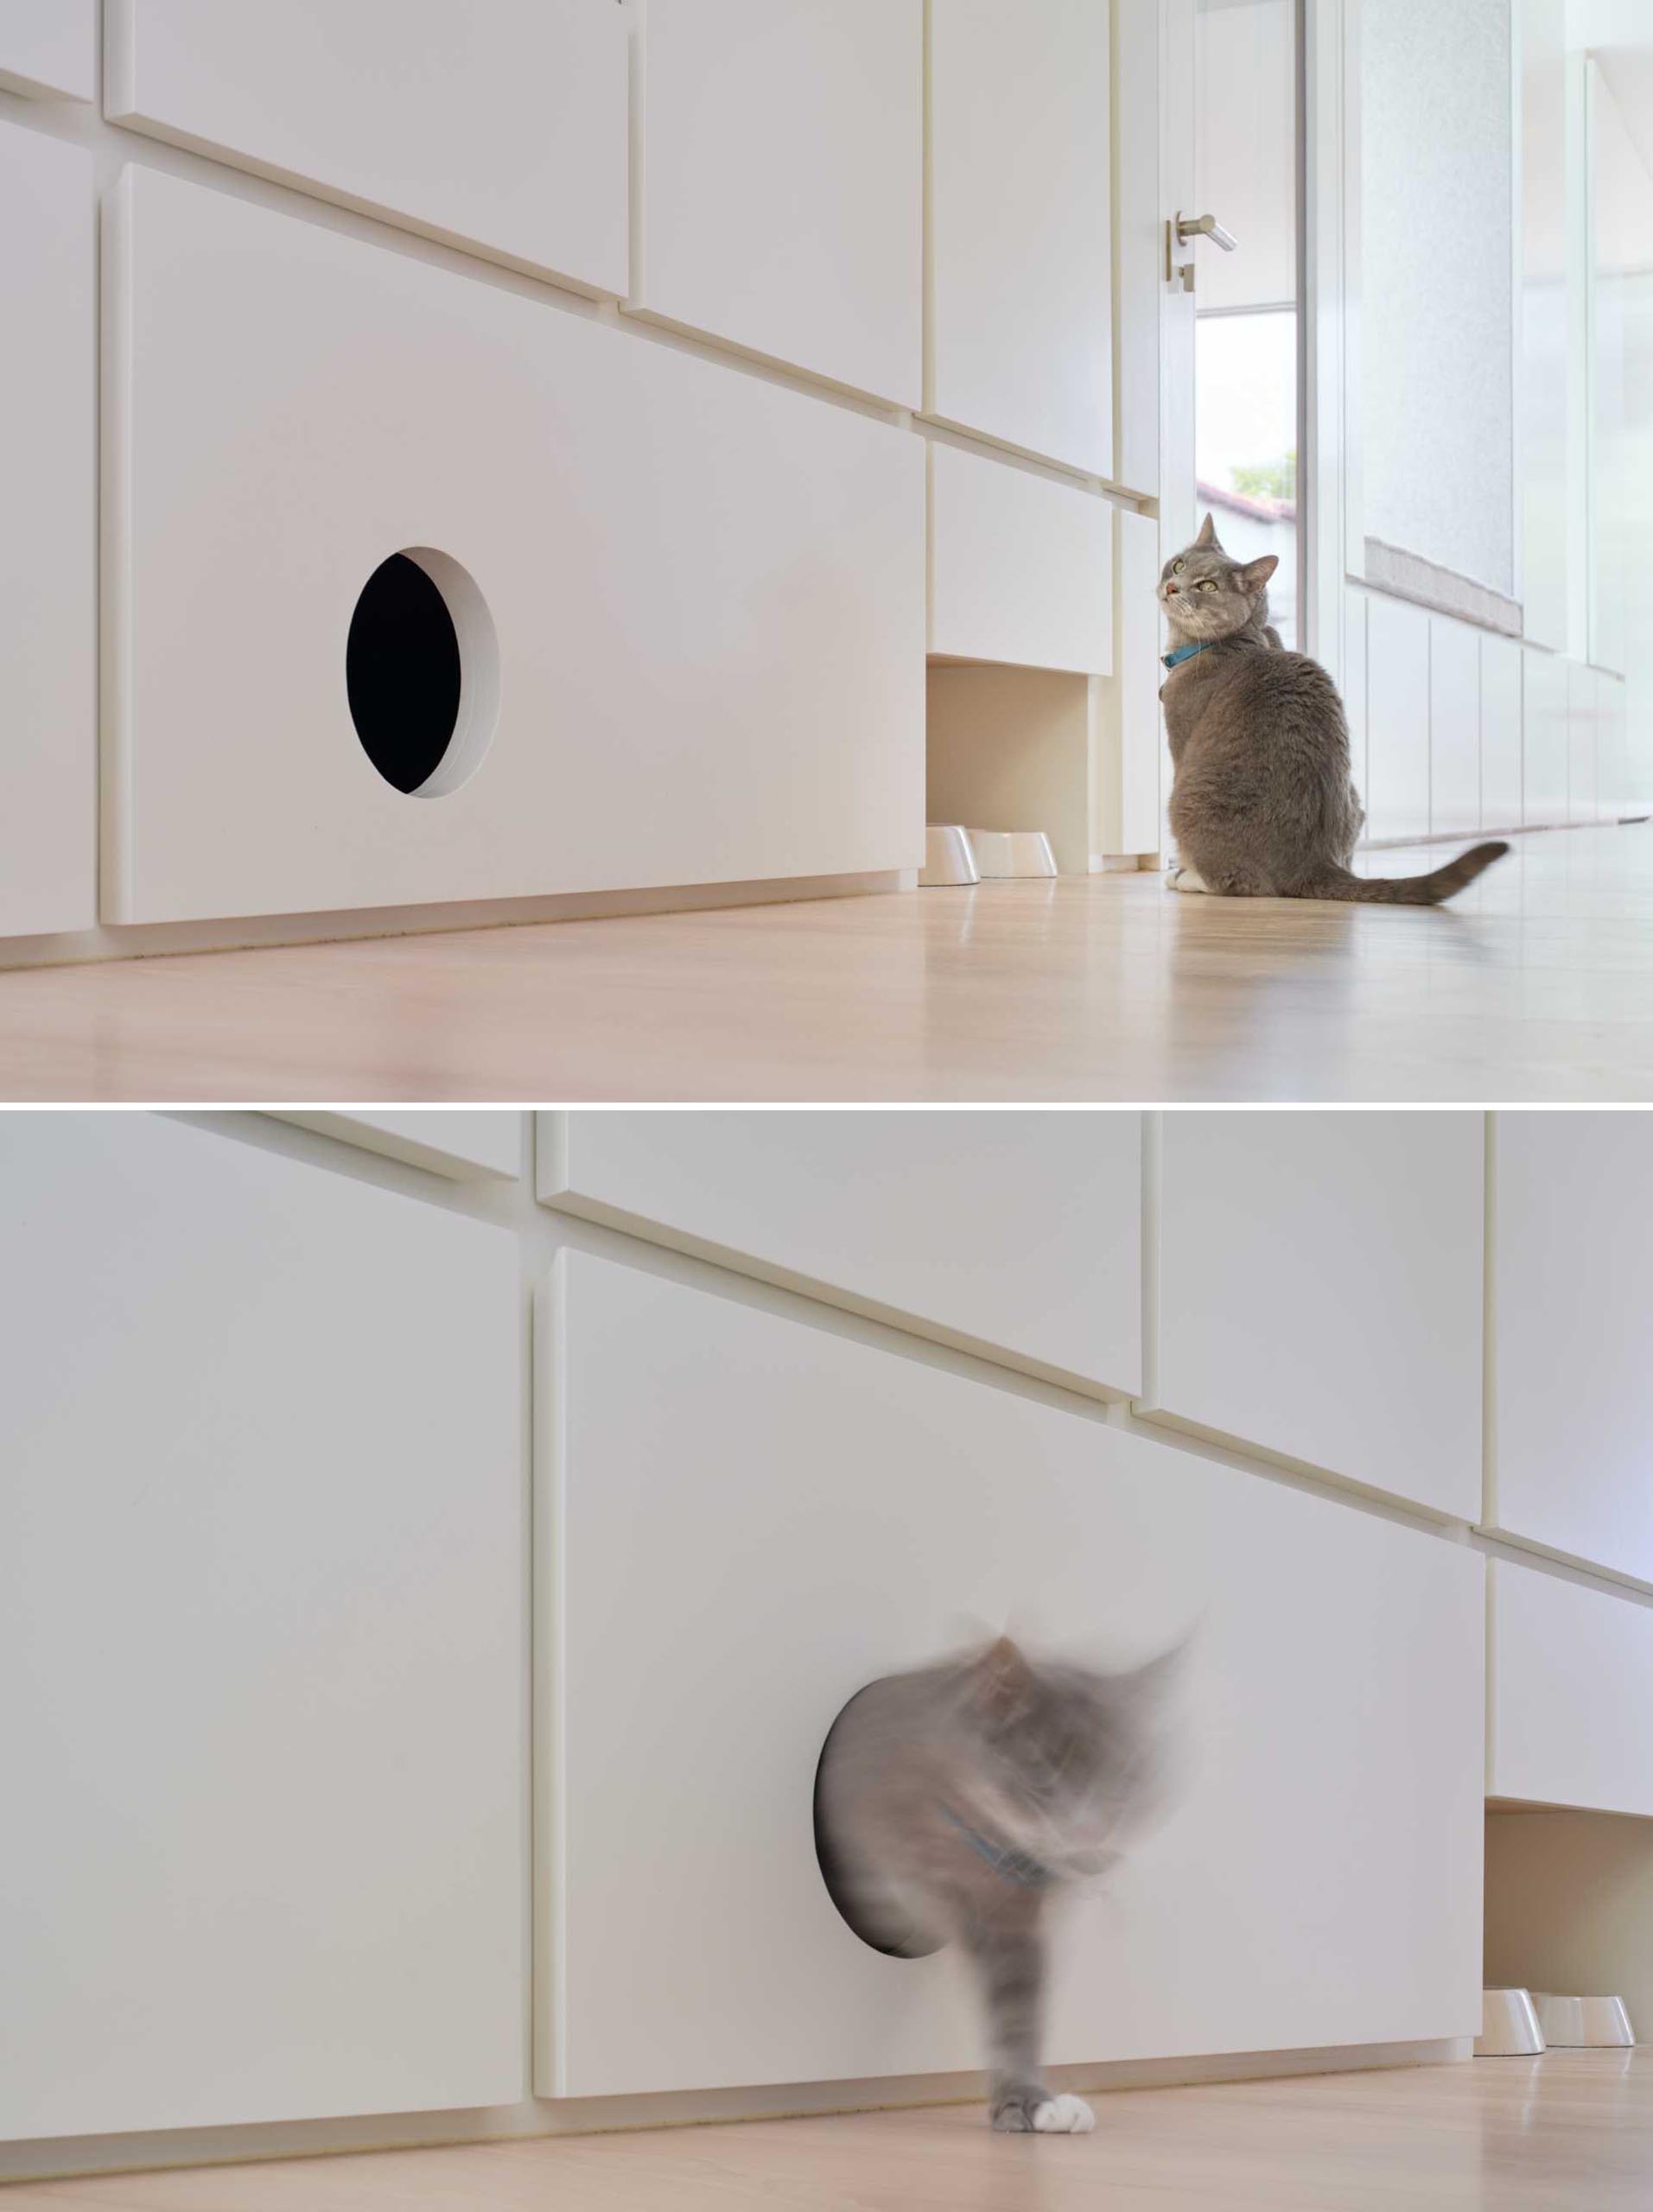 A design detail in the hallway is a small section of the cabinets dedicated to a cat's food station and built-in litterbox.